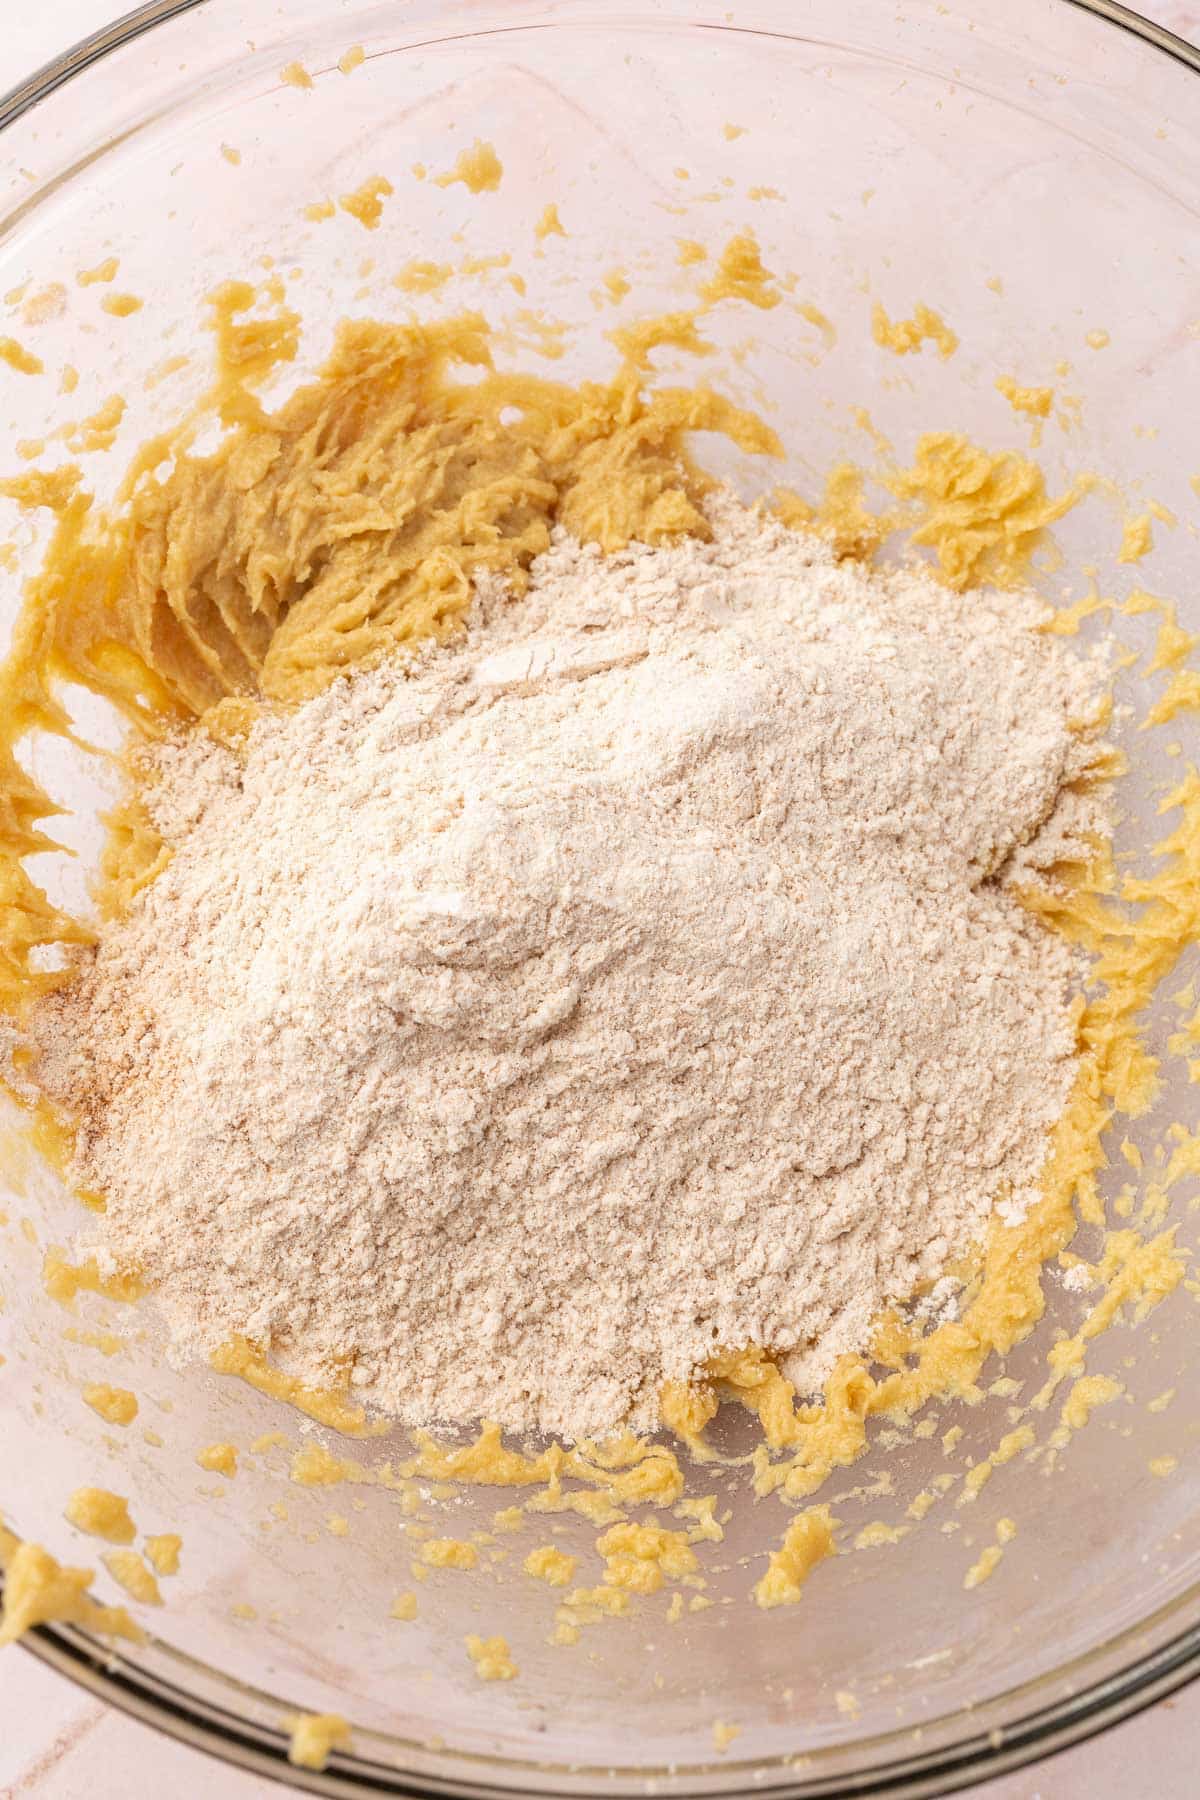 A glass mixing bowl of gluten-free batter topped with gluten-free flour blend.